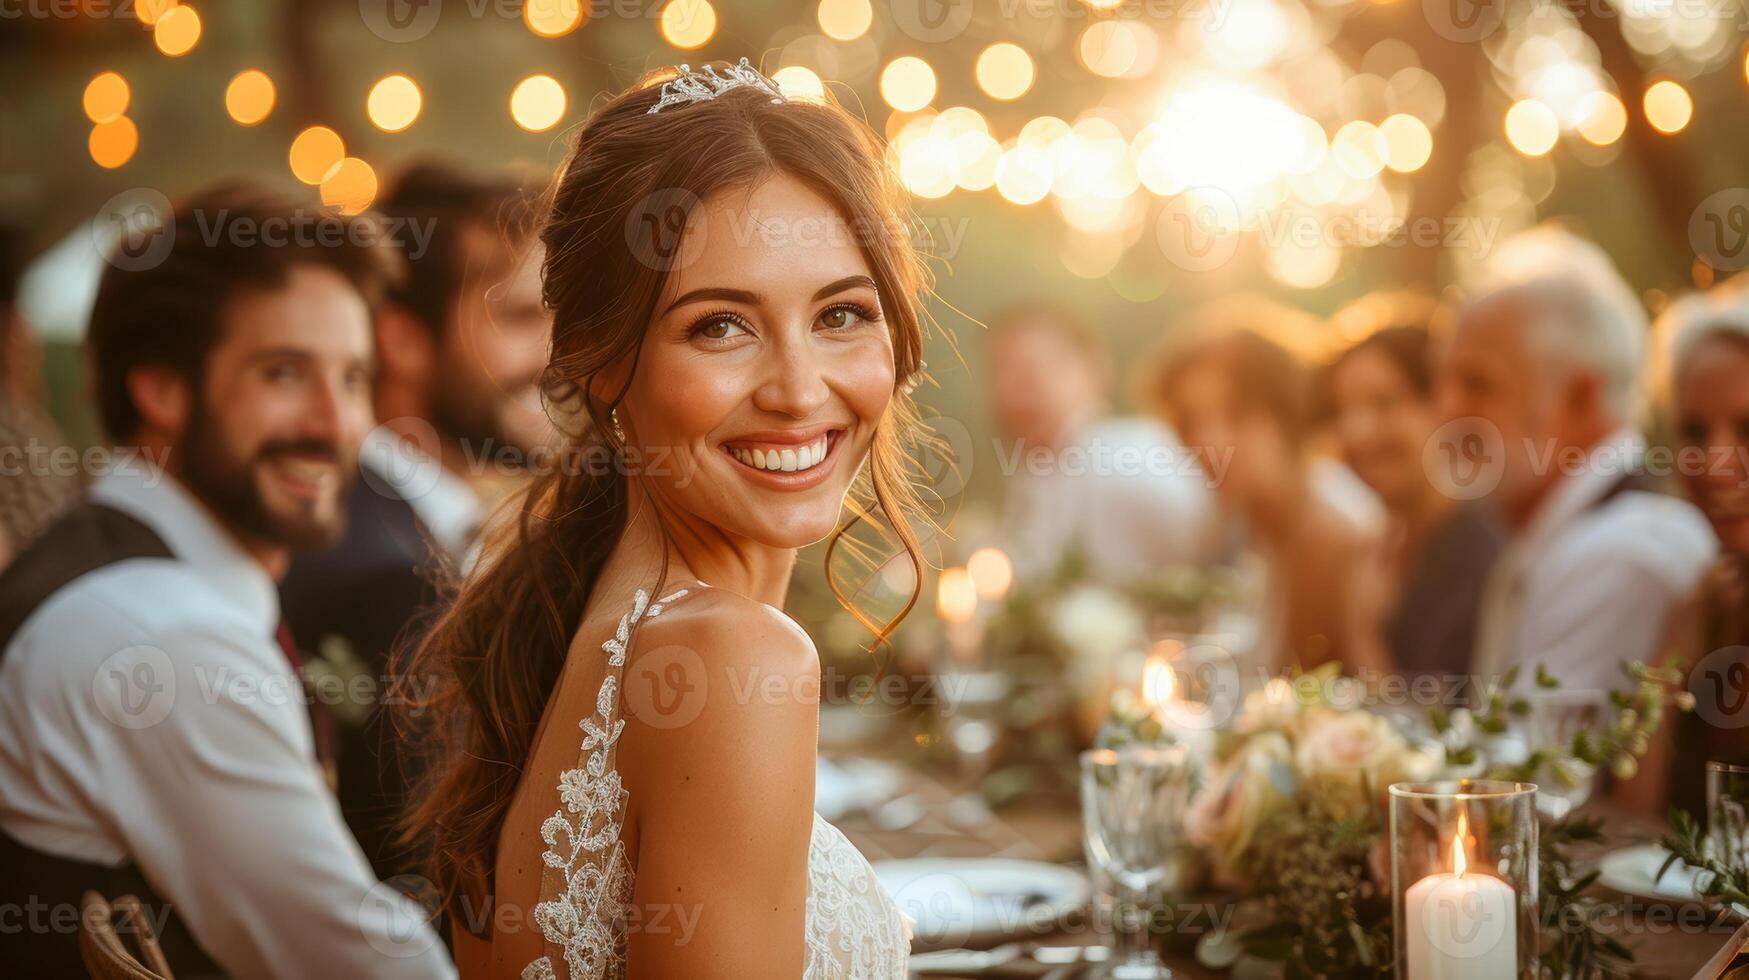 Radiant Bride Smiling at Elegant Outdoor Wedding Reception with Guests photo